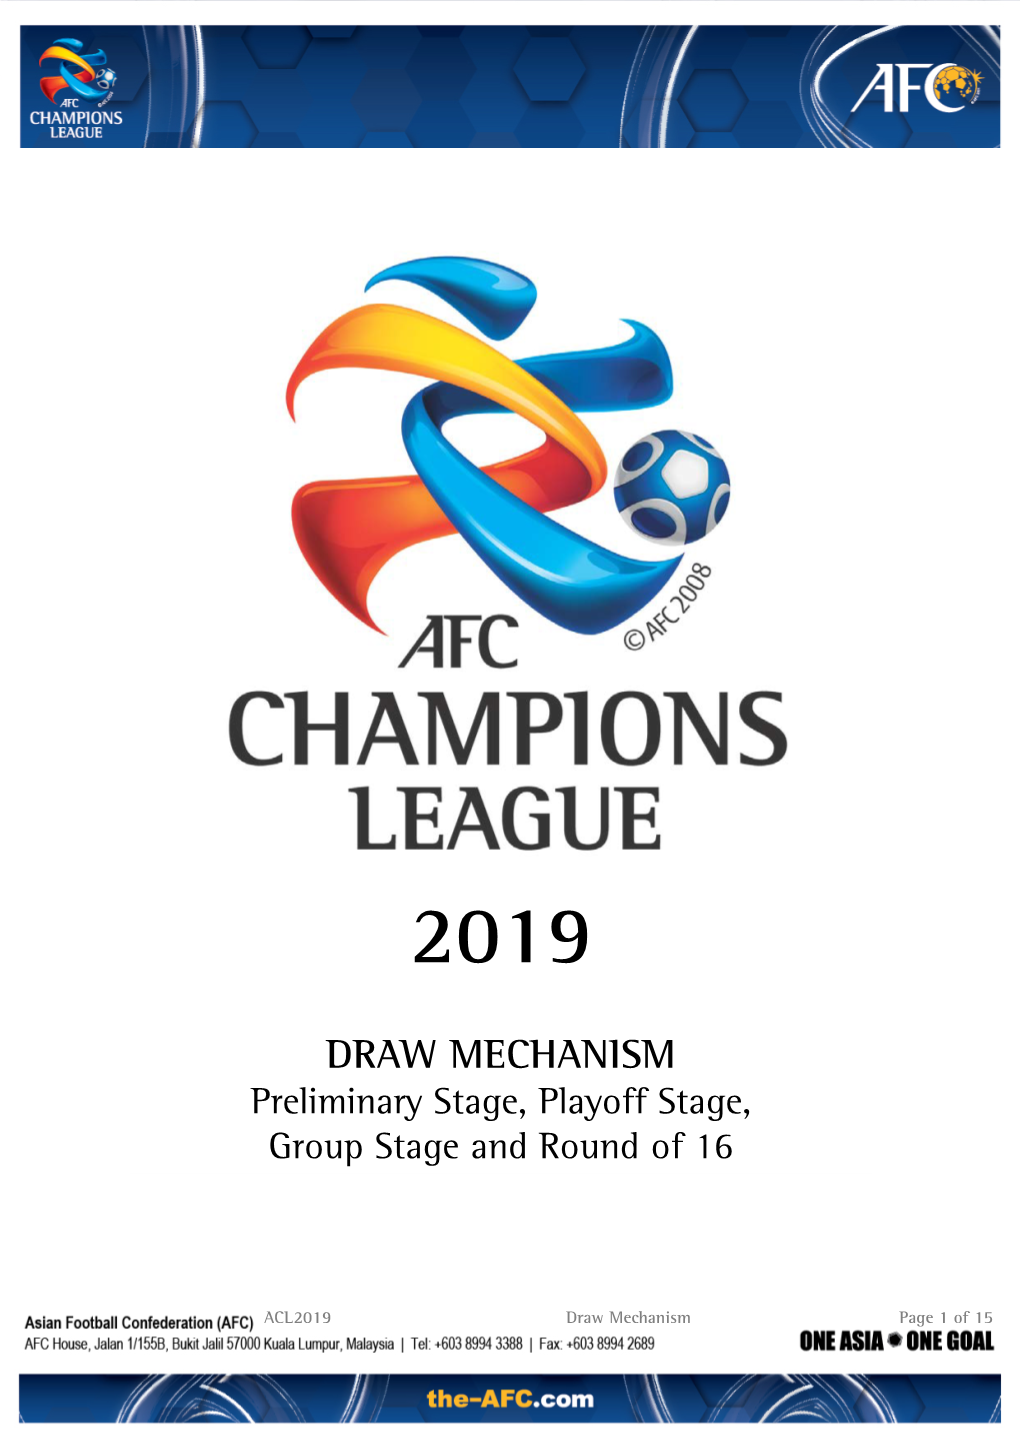 DRAW MECHANISM Preliminary Stage, Playoff Stage, Group Stage and Round of 16